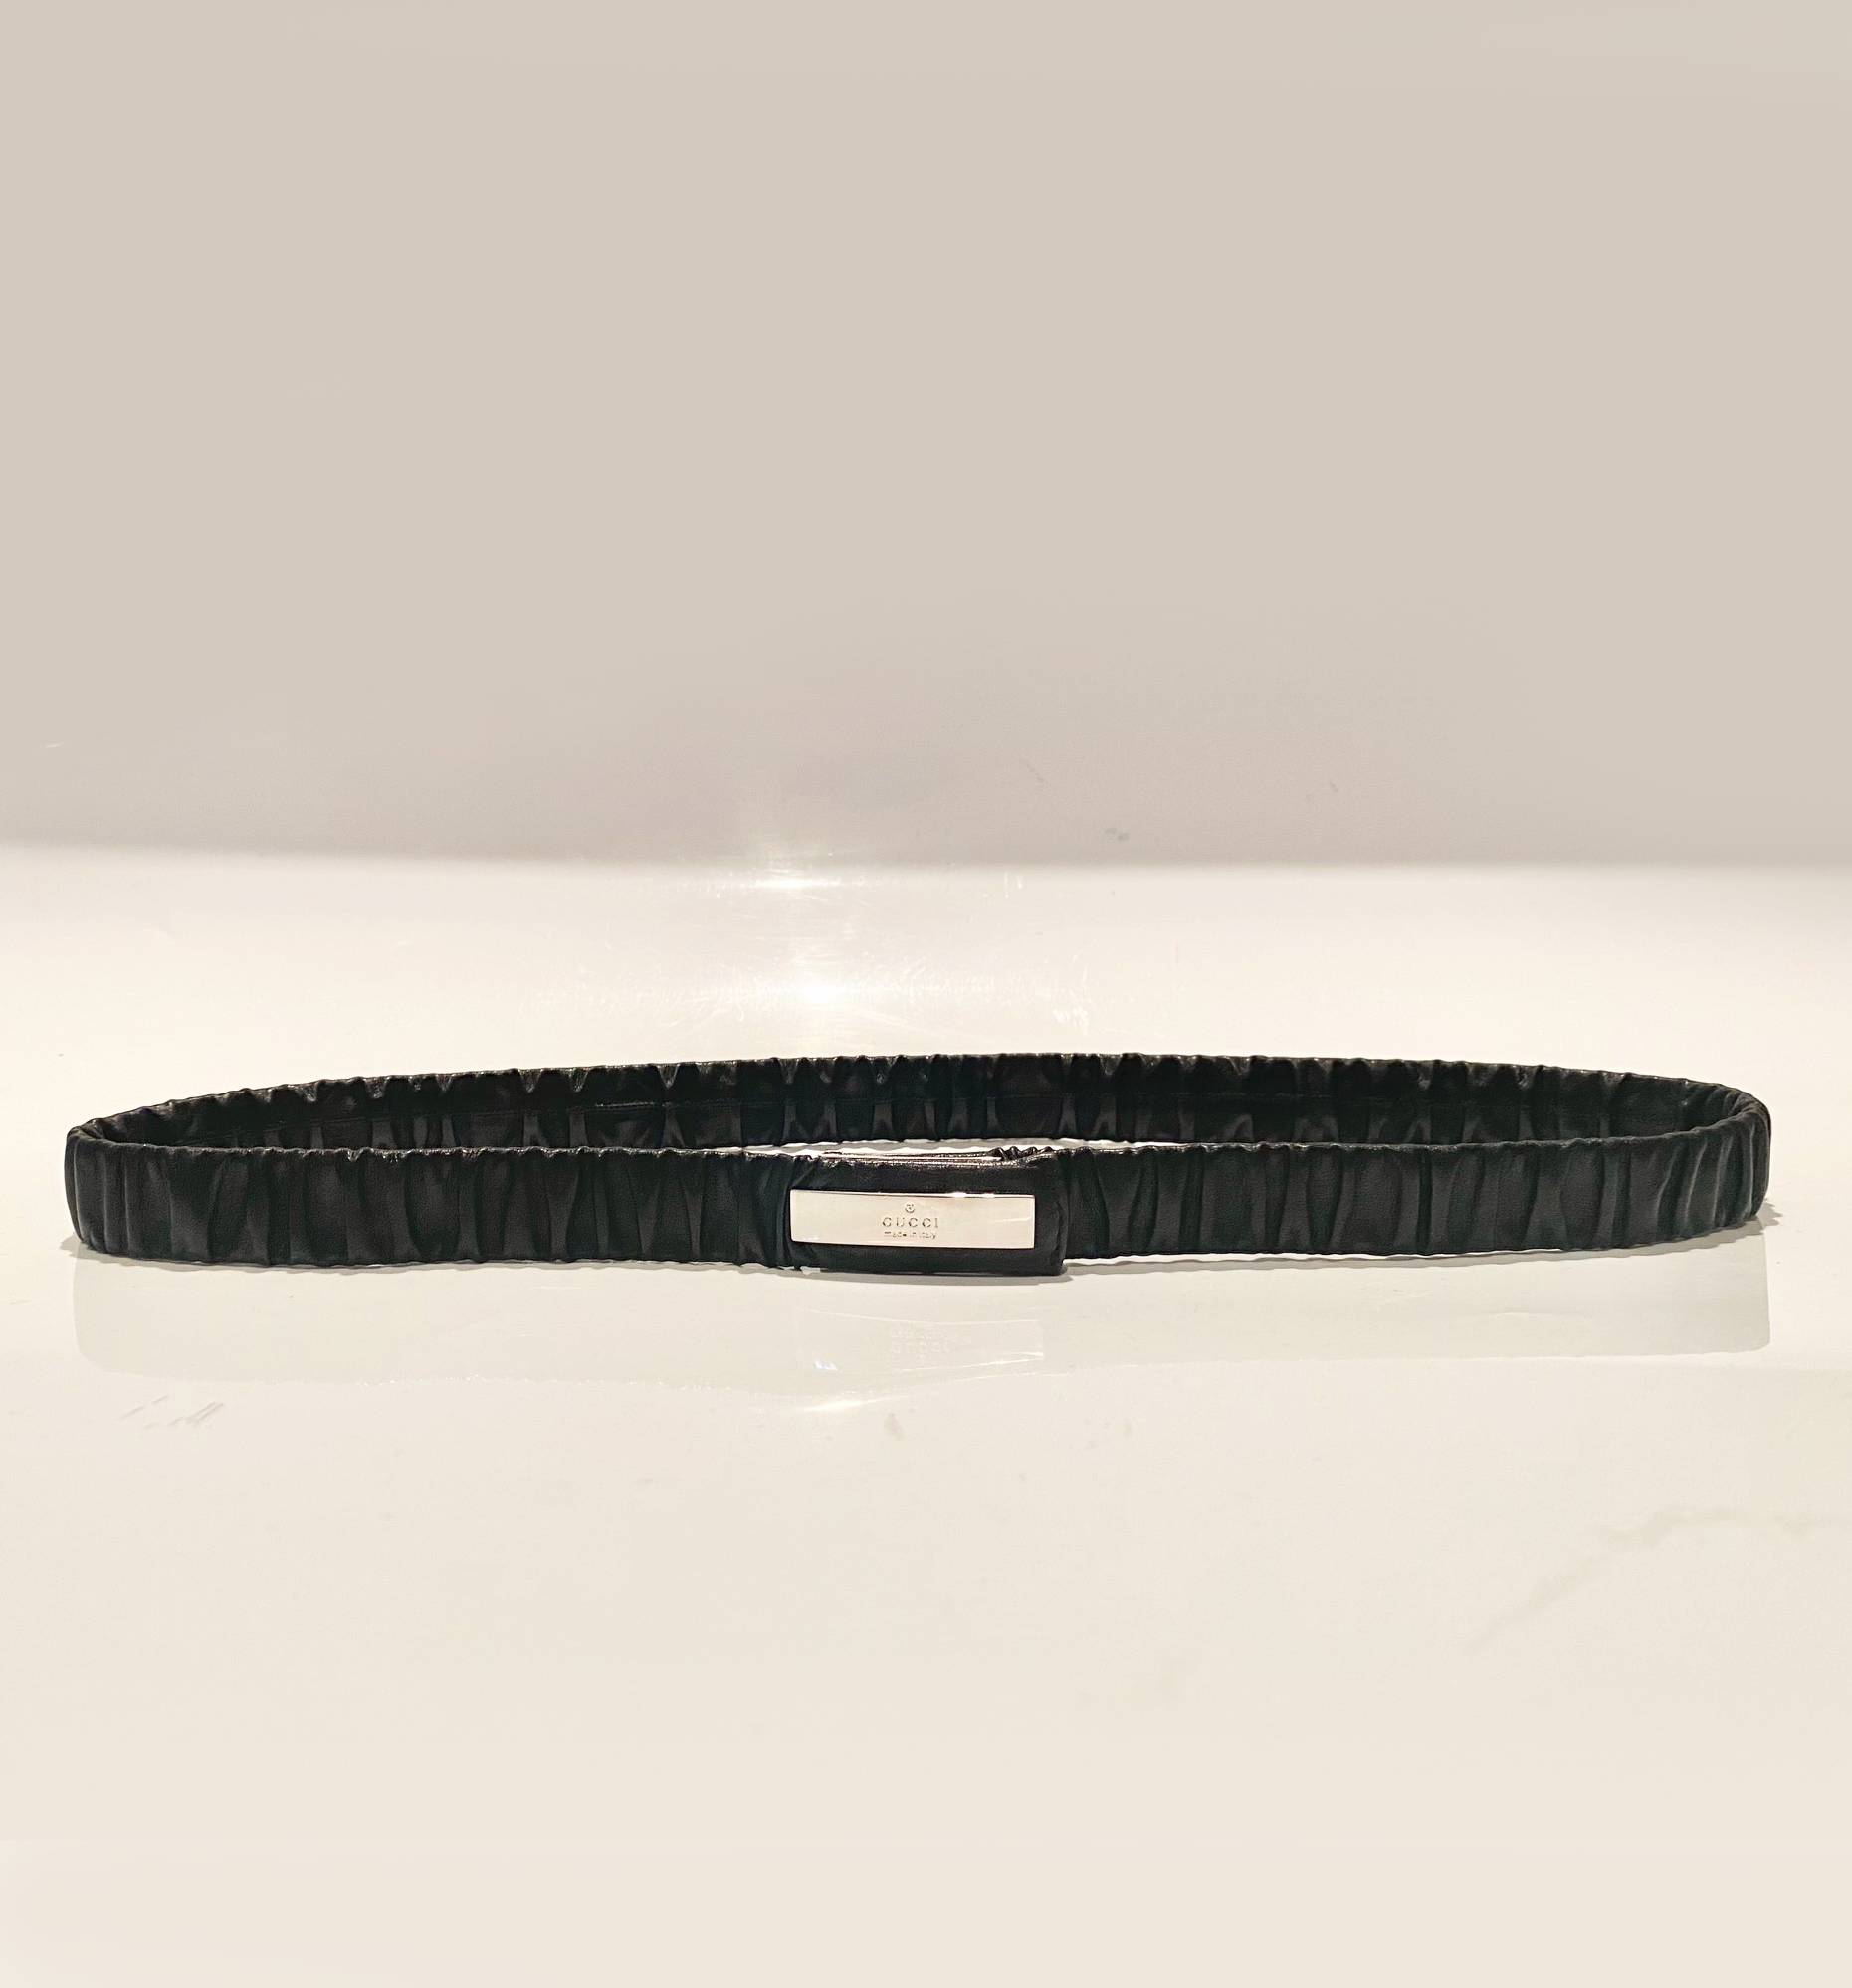 2000s Tom Ford for Gucci Elasticated Black Leather Belt - style - CHNGR